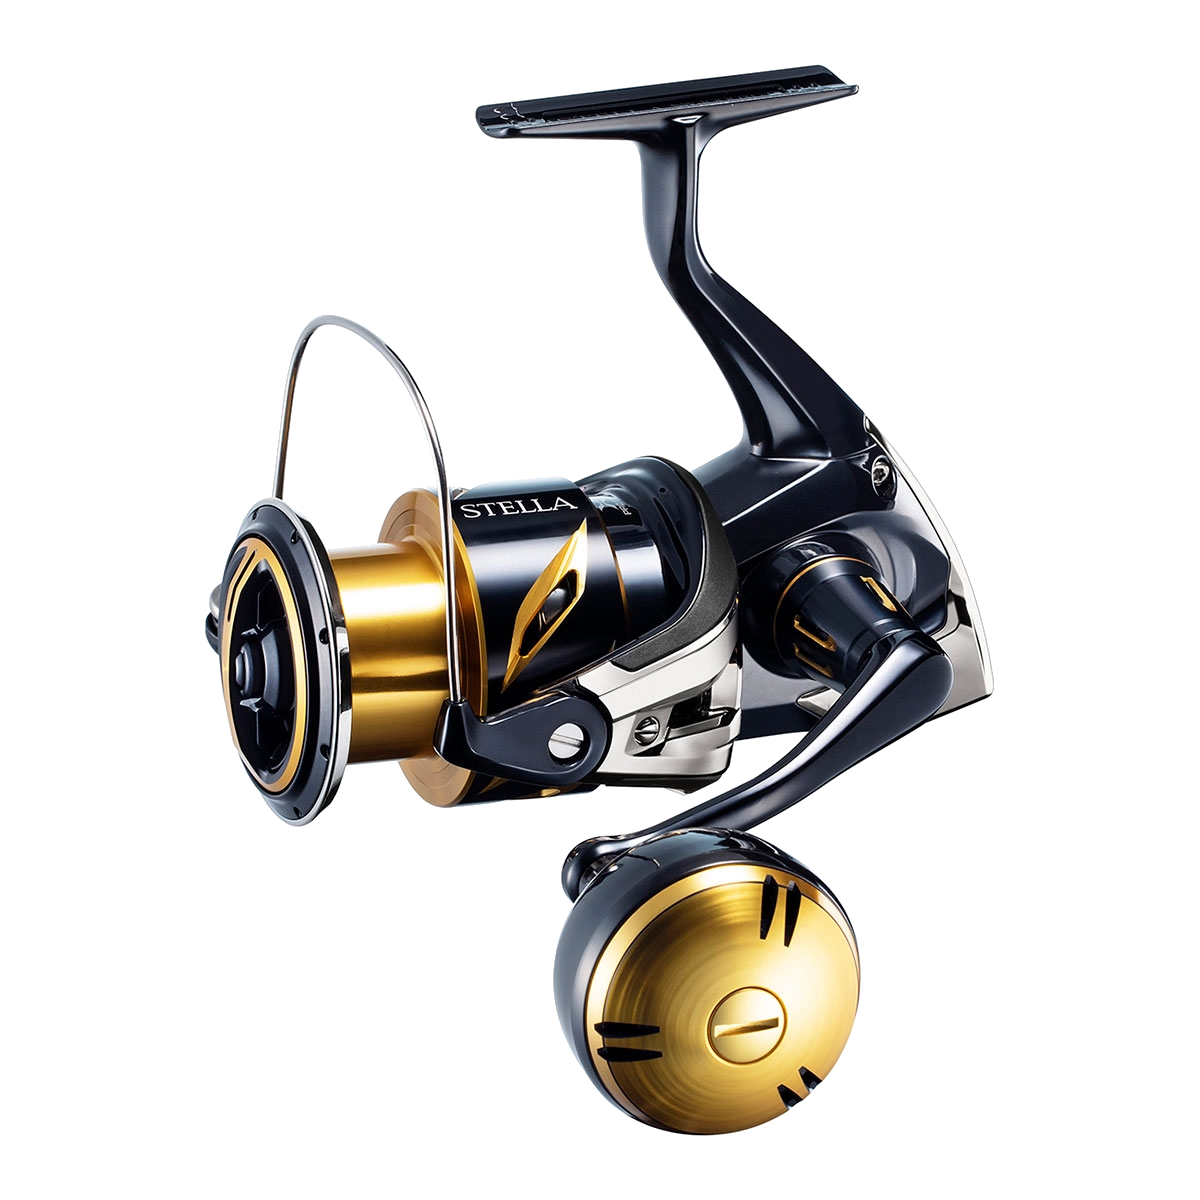 The Shimano Stella SW Review - Is This the Most Powerful Reel Ever Made -  USAngler